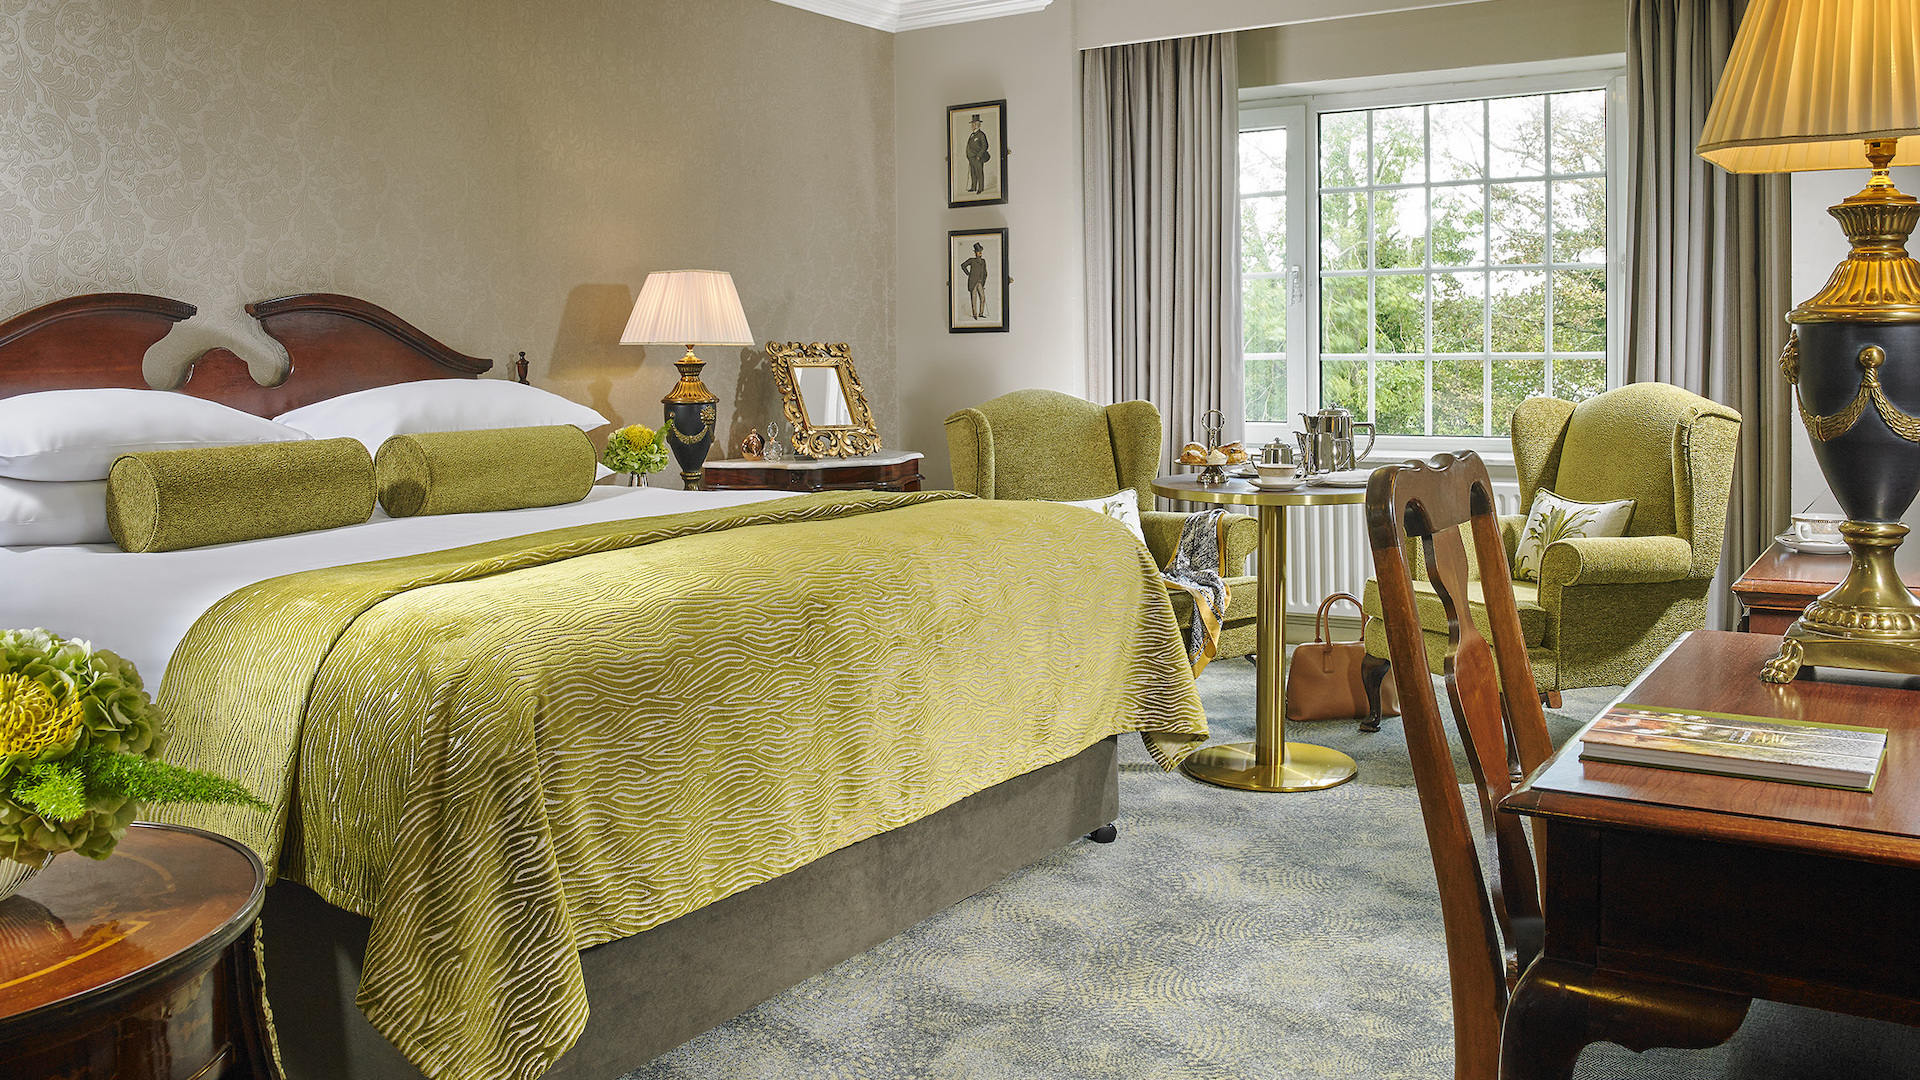 Elegant hotel room in Ireland with twin beds, traditional furniture, and a sitting area.